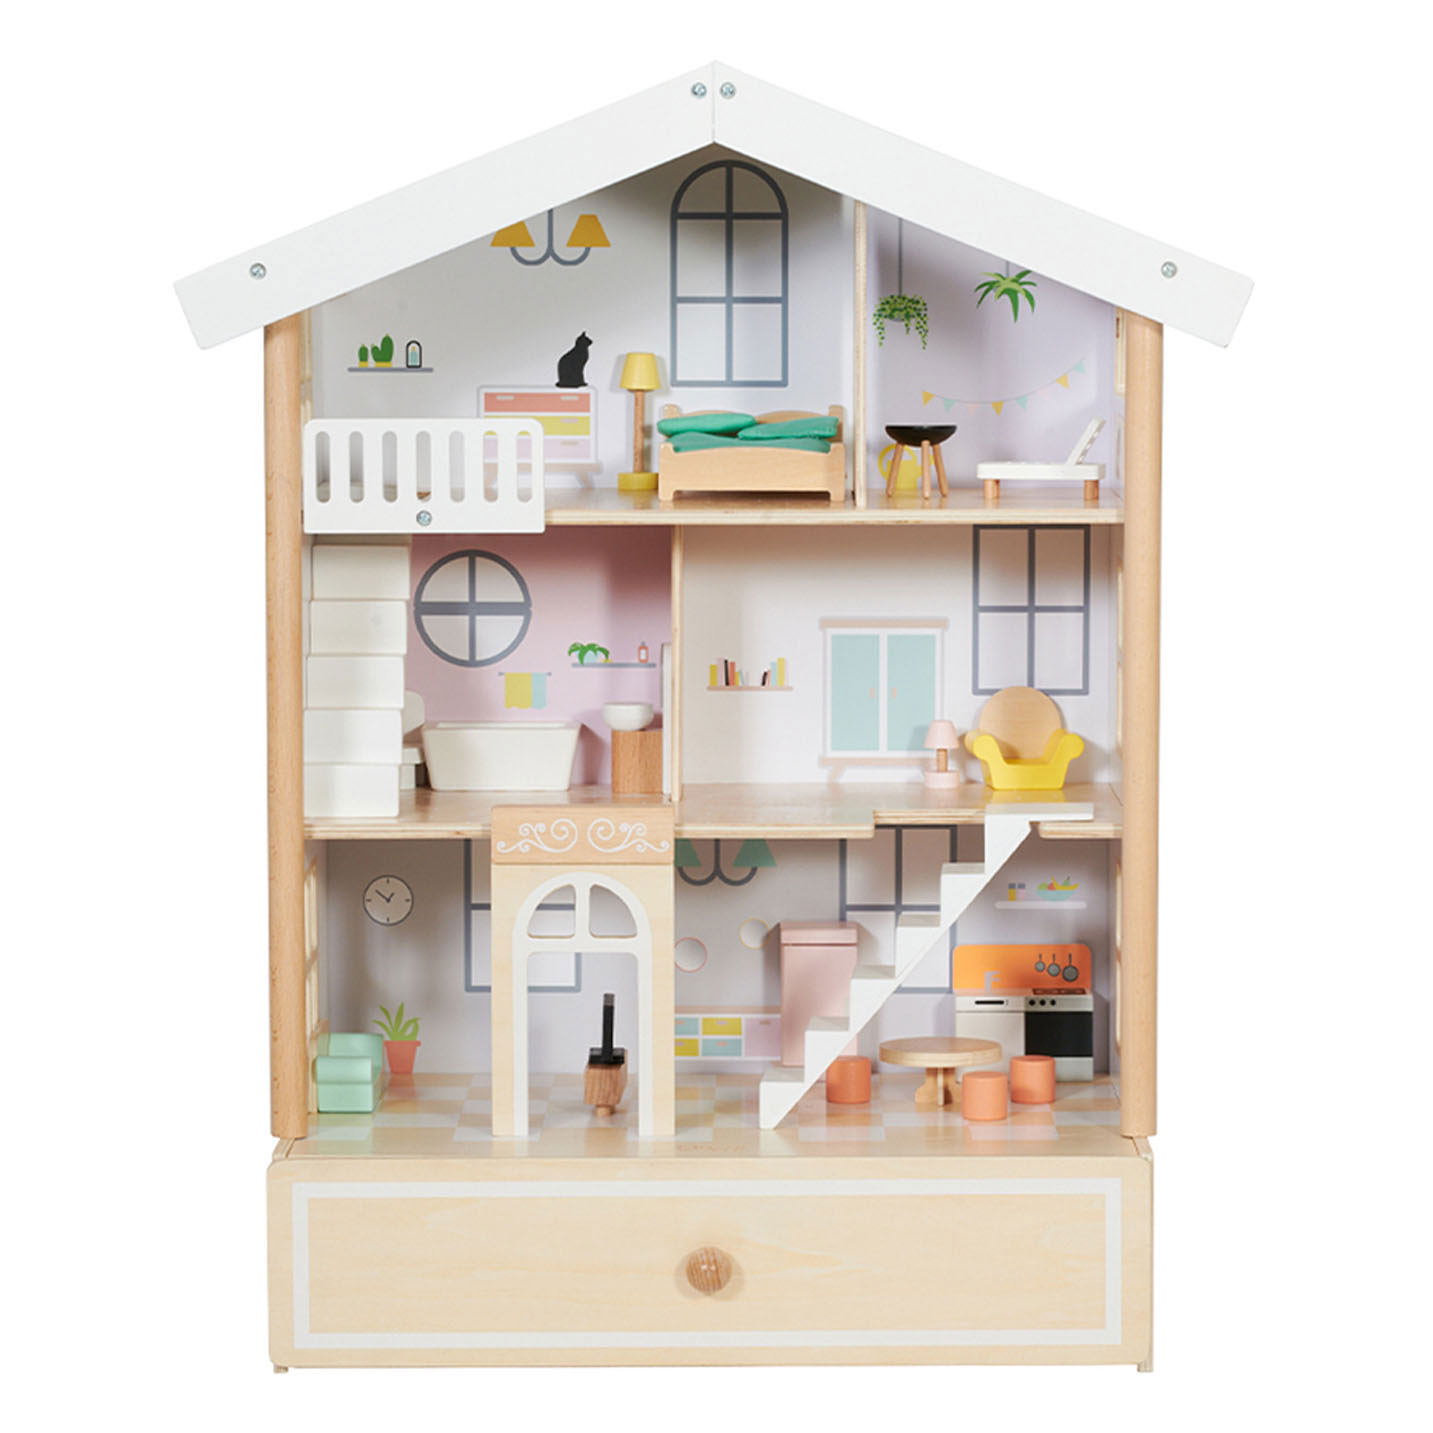 Small Foot - Wooden Urban Villa Dollhouse with Accessories, 13dlg